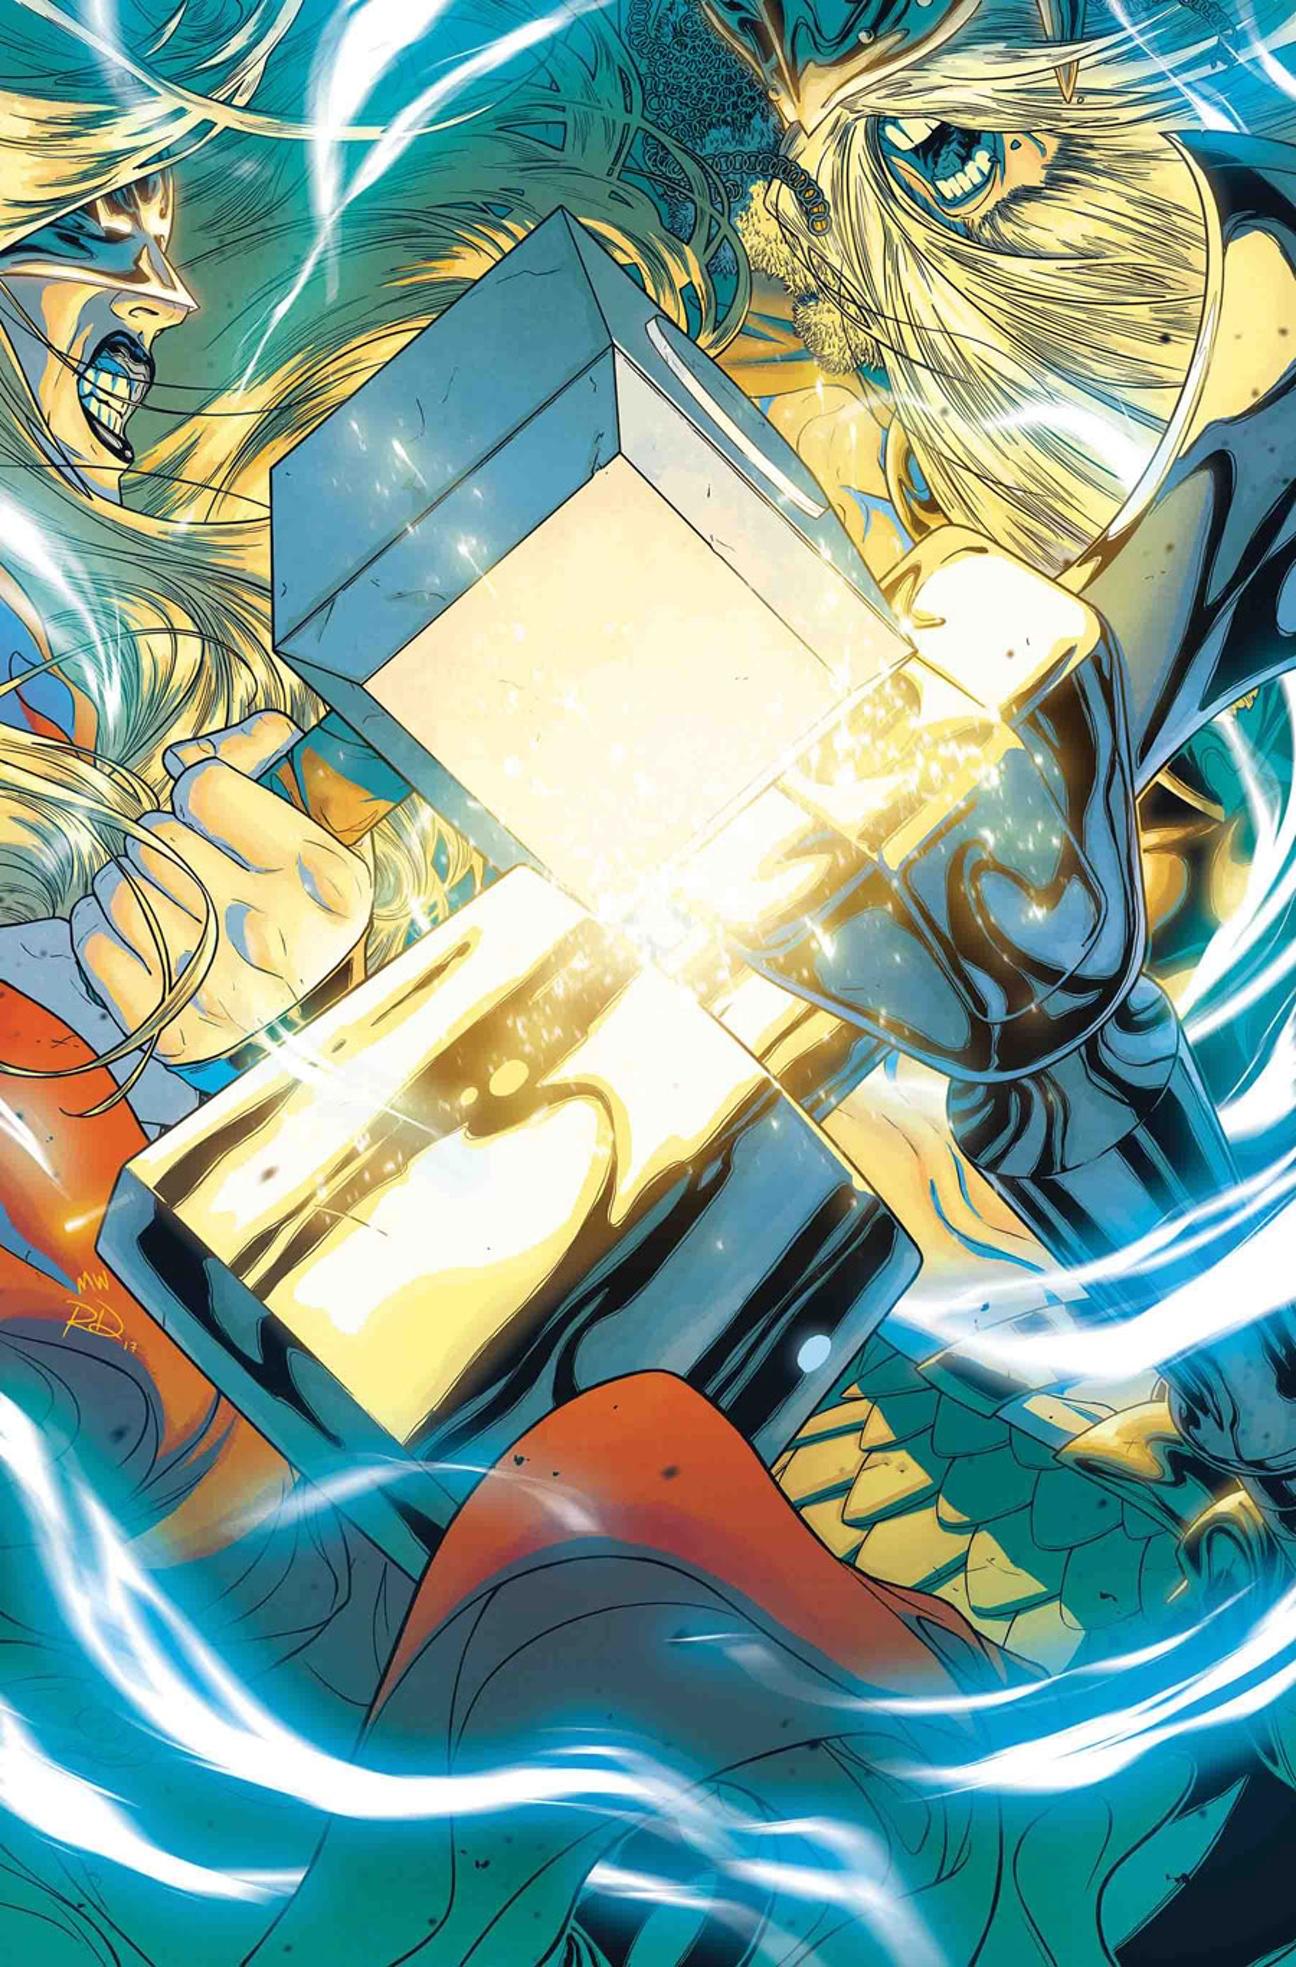 The Mighty Thor Vol. 2 #23